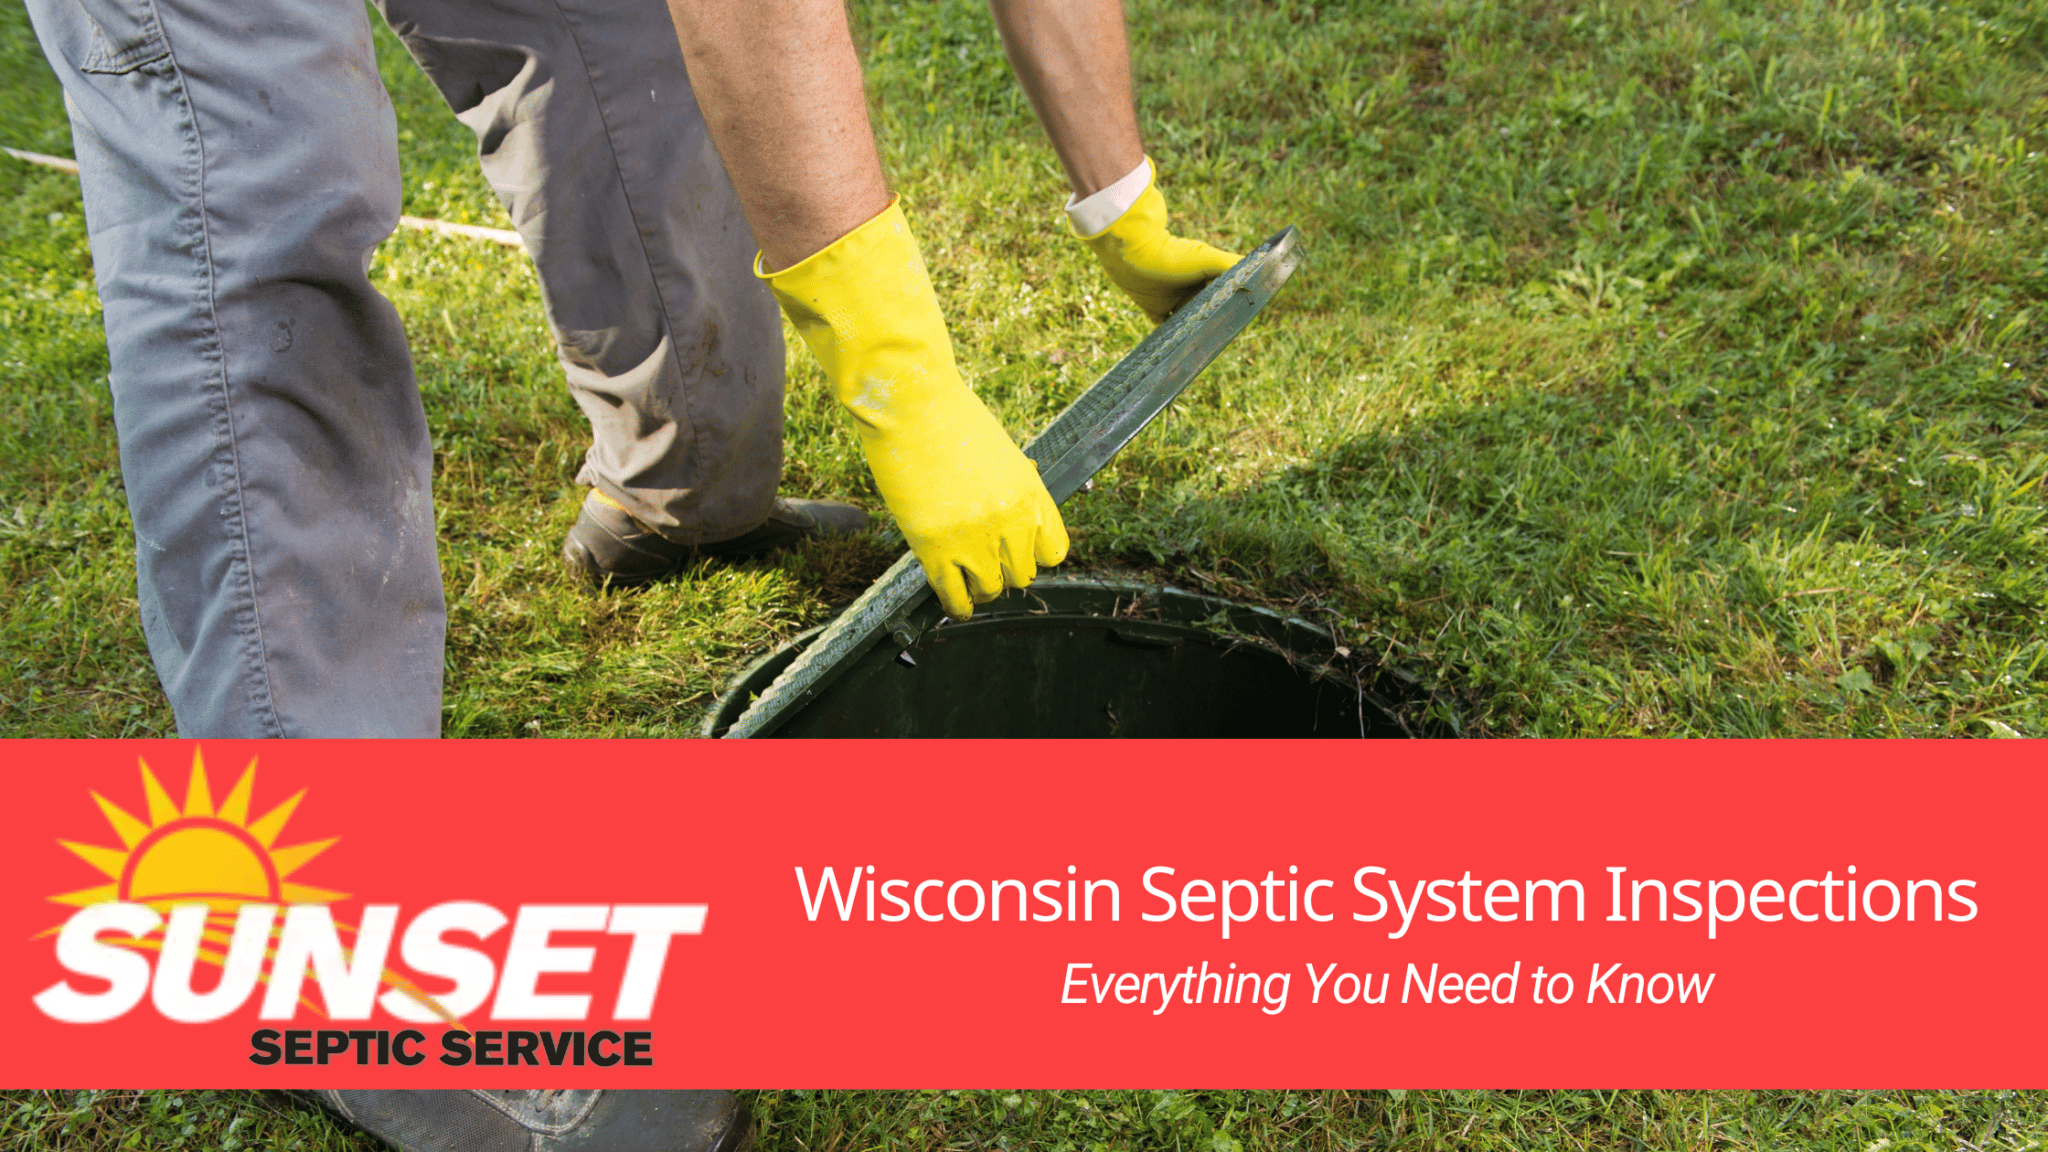 Septic system failure signs you need to know